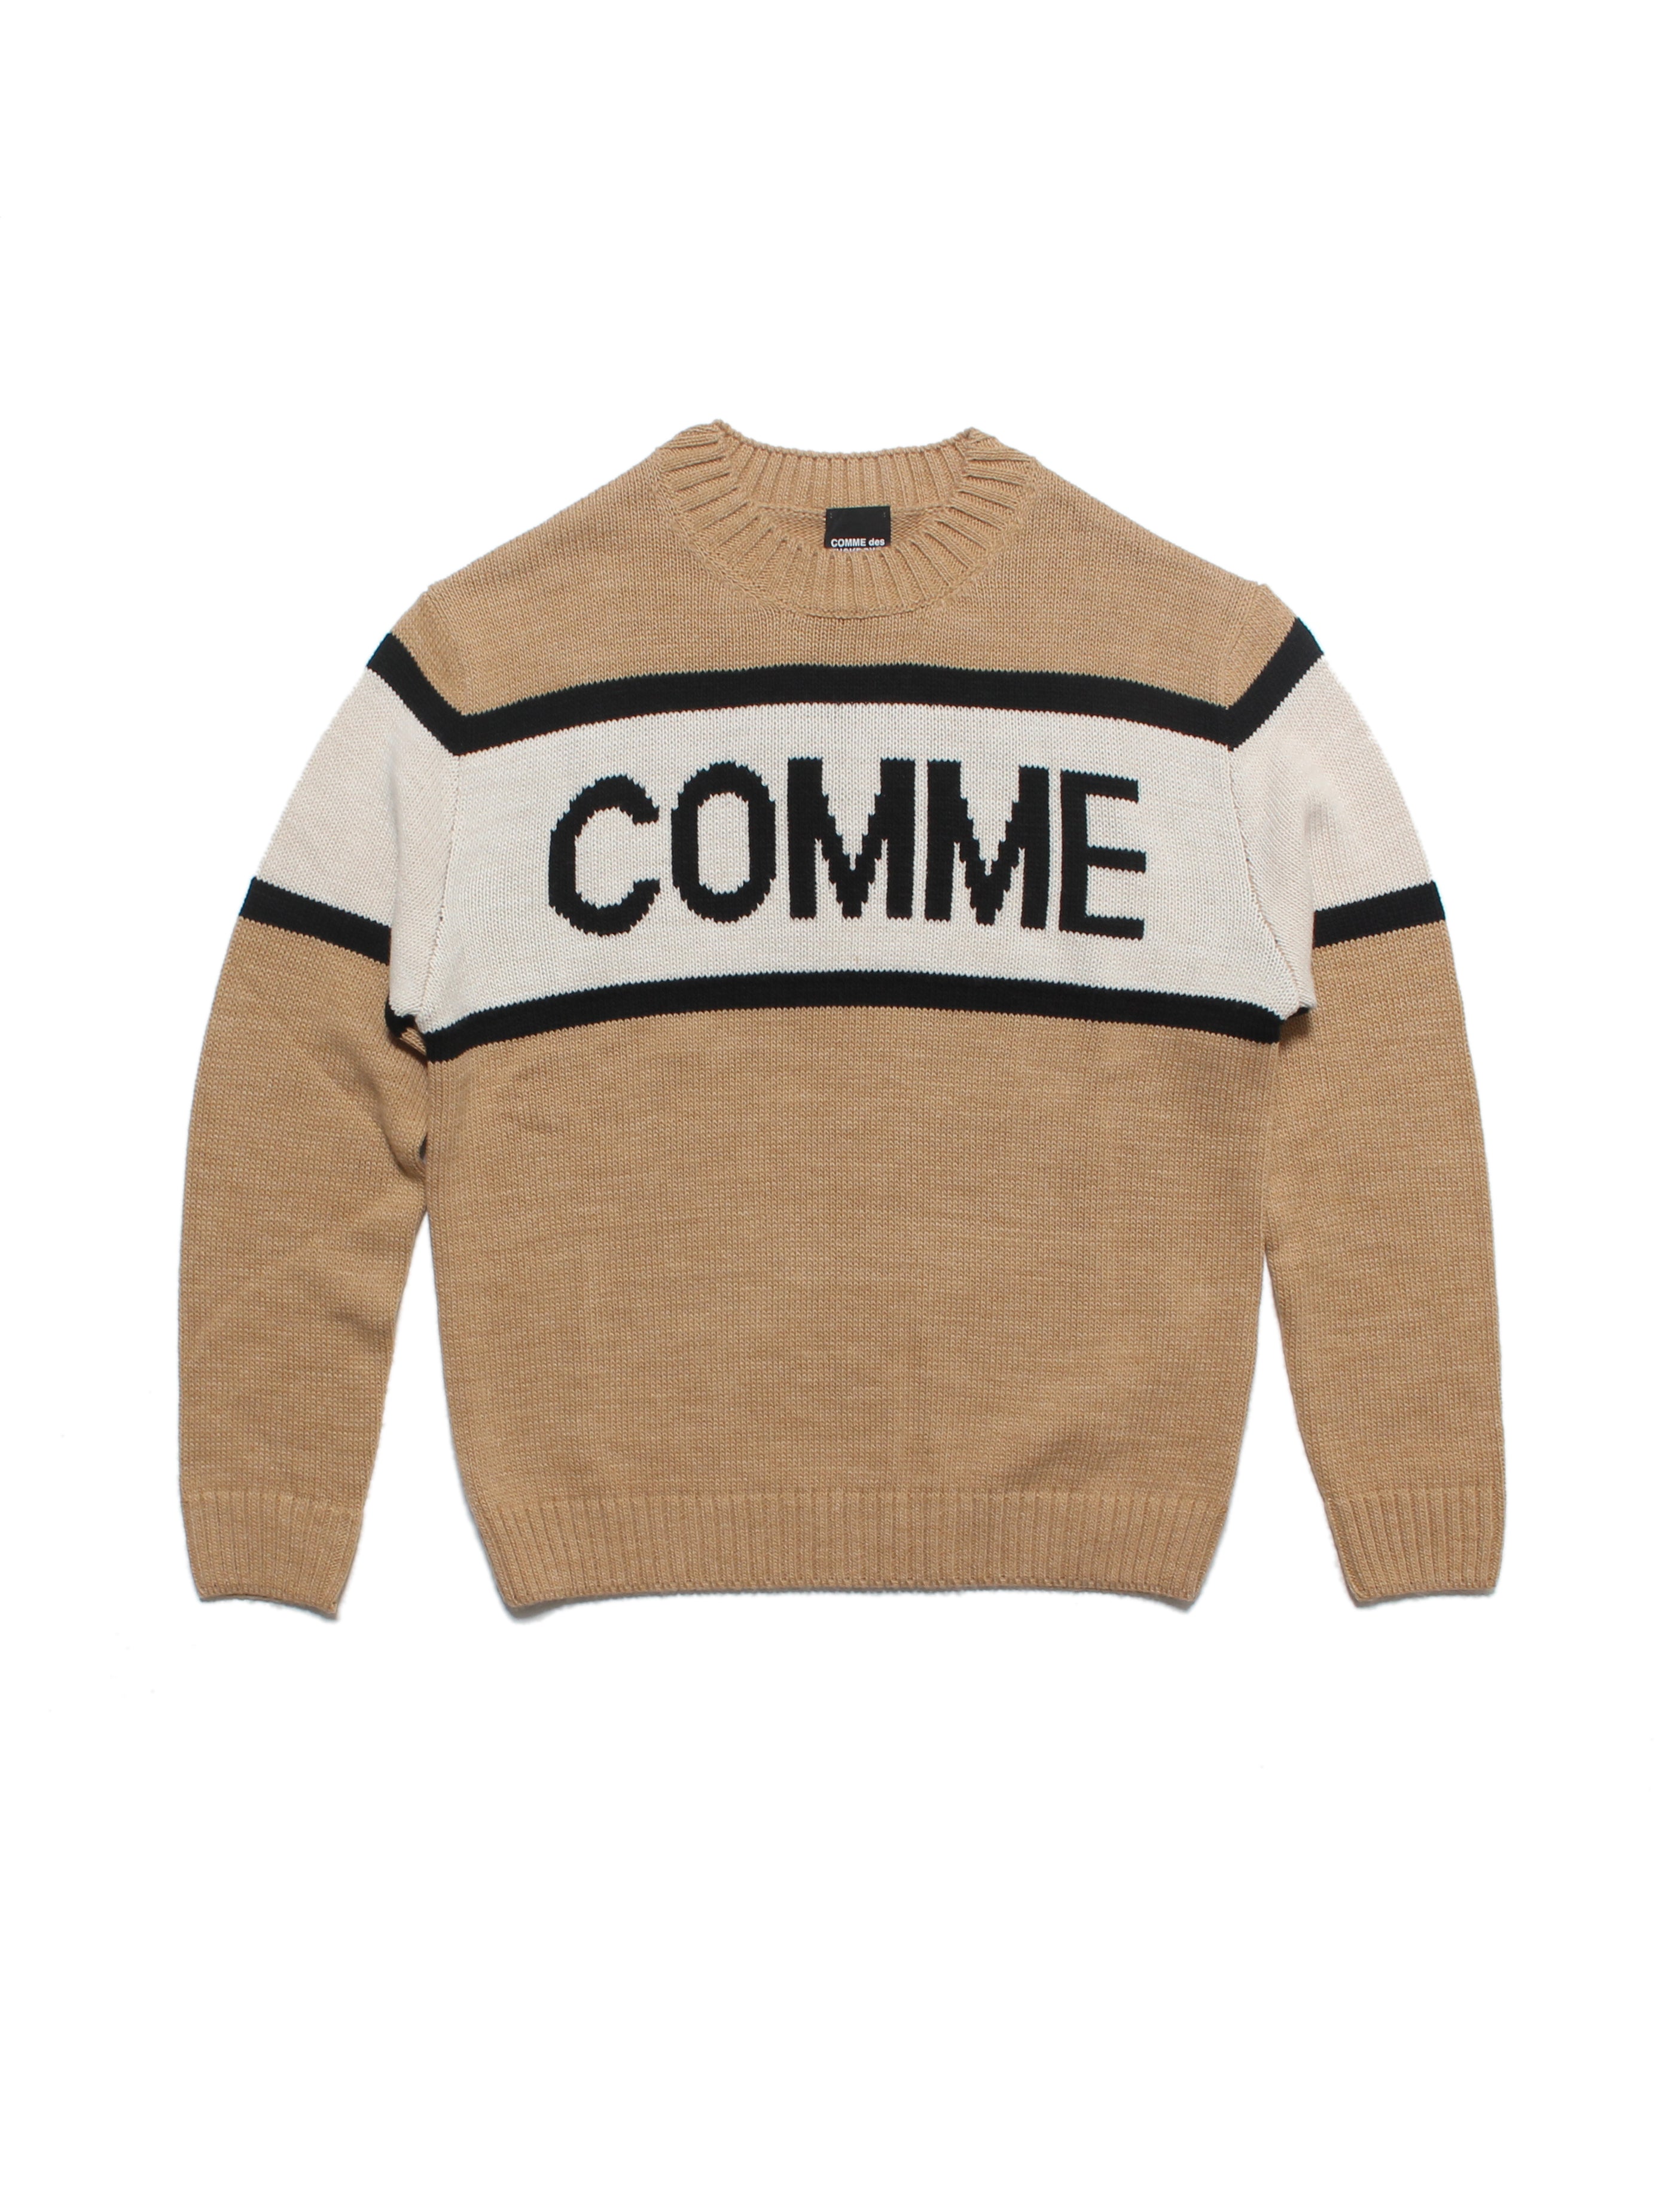 LONG SLEEVE KNIT SWEATER WITH BEIGE INLAY - BEIGE